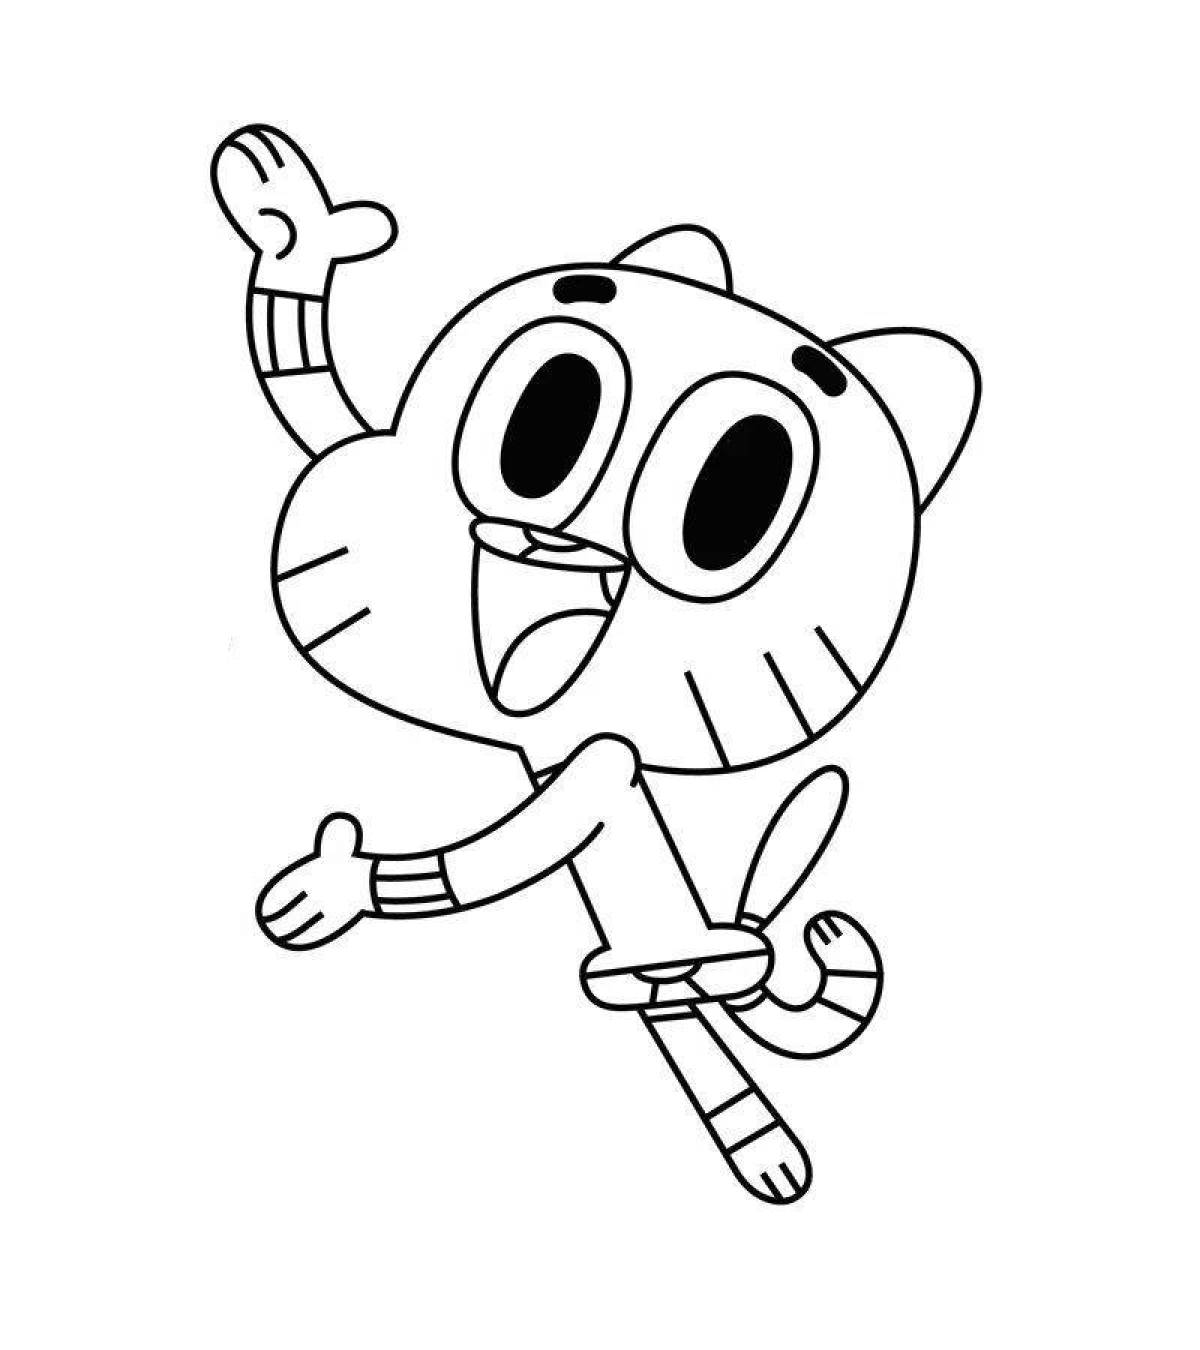 Radiant gumball coloring page